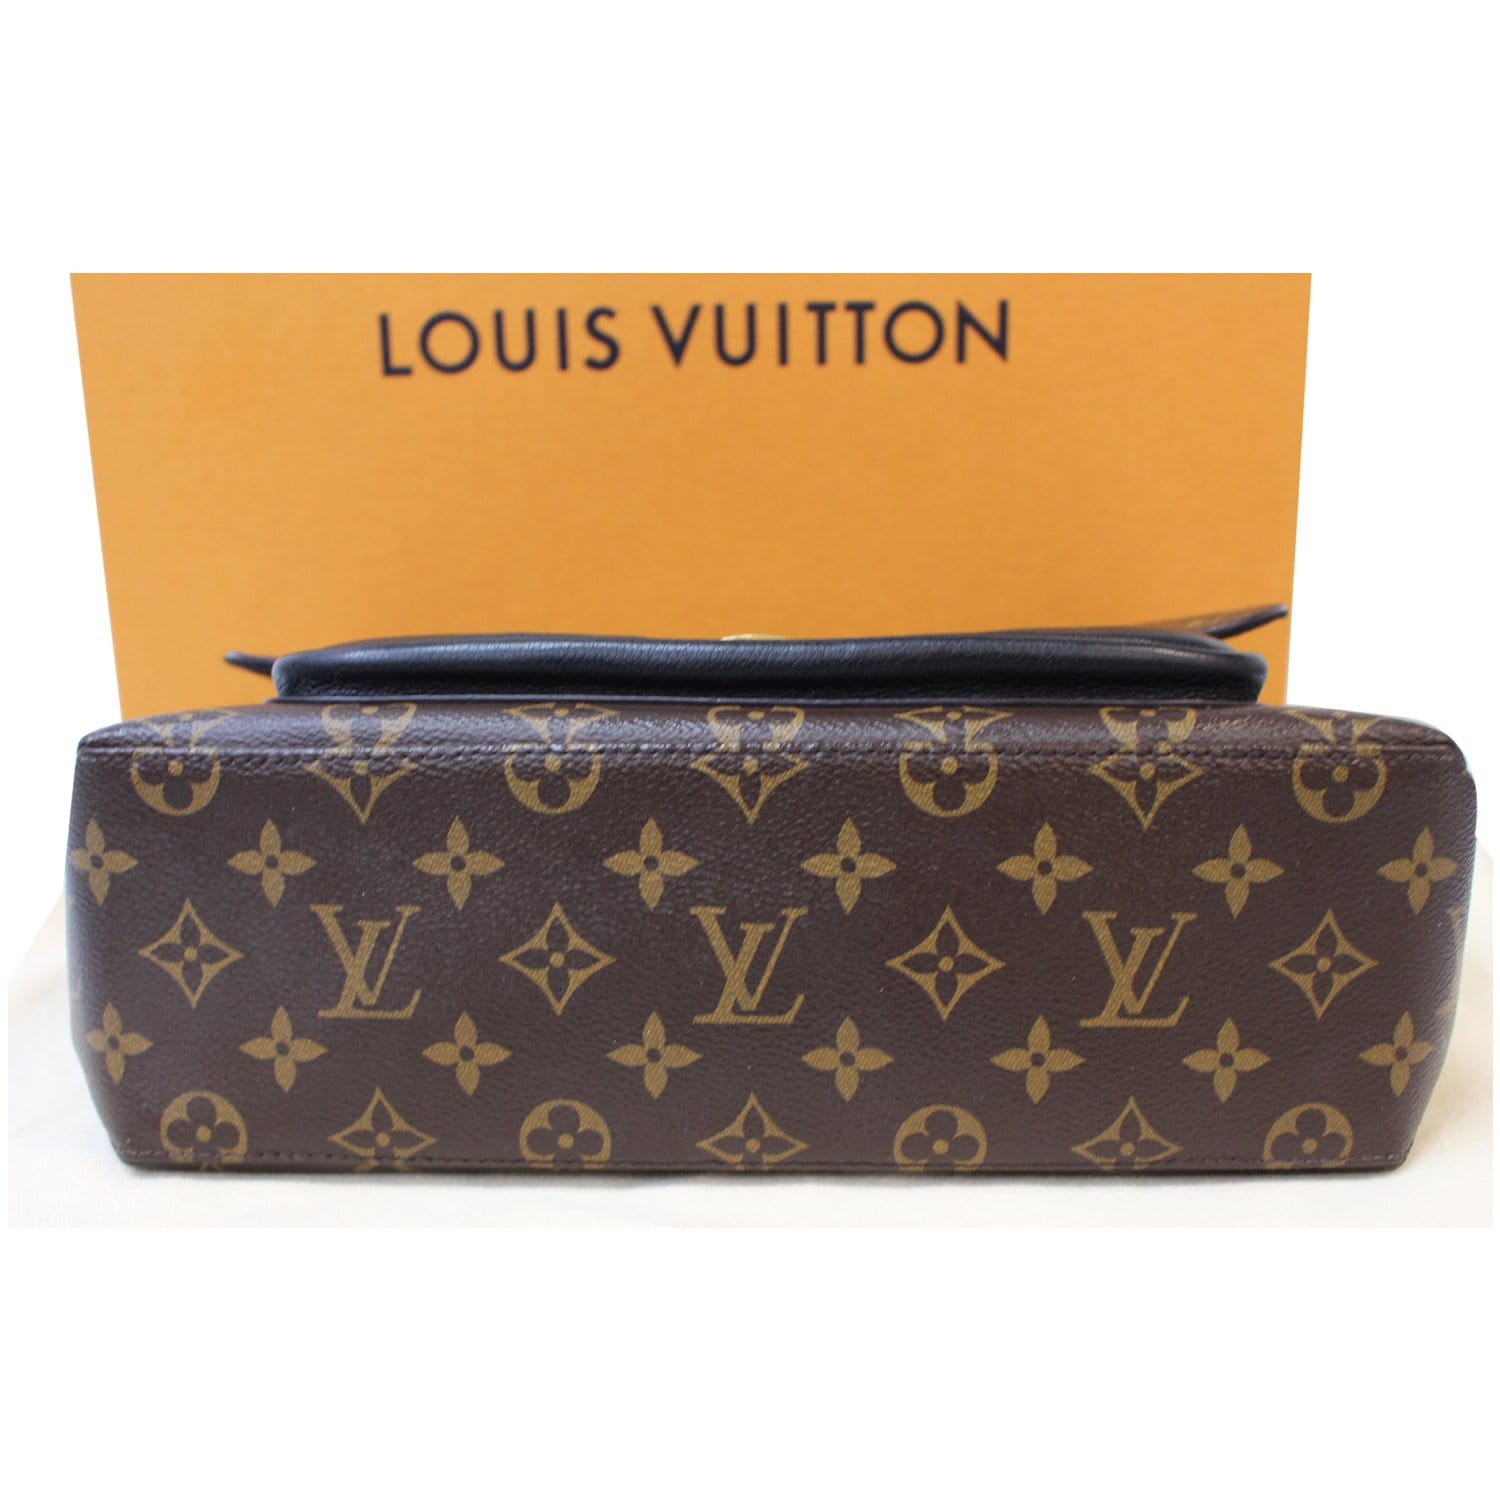 Marineh David AB on Instagram‎: Louis Vuitton 🤎 the ultimate